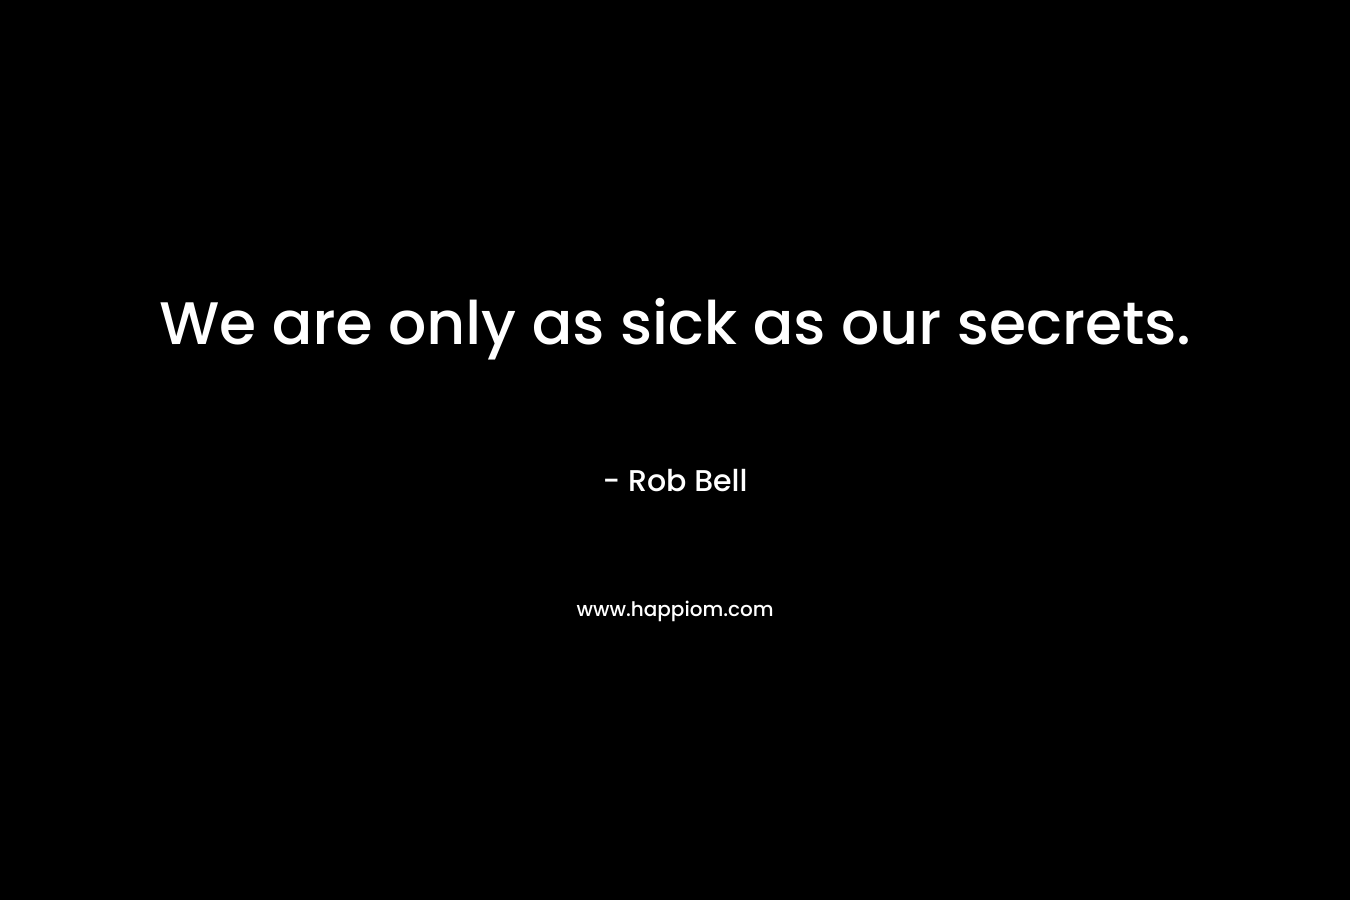 We are only as sick as our secrets.